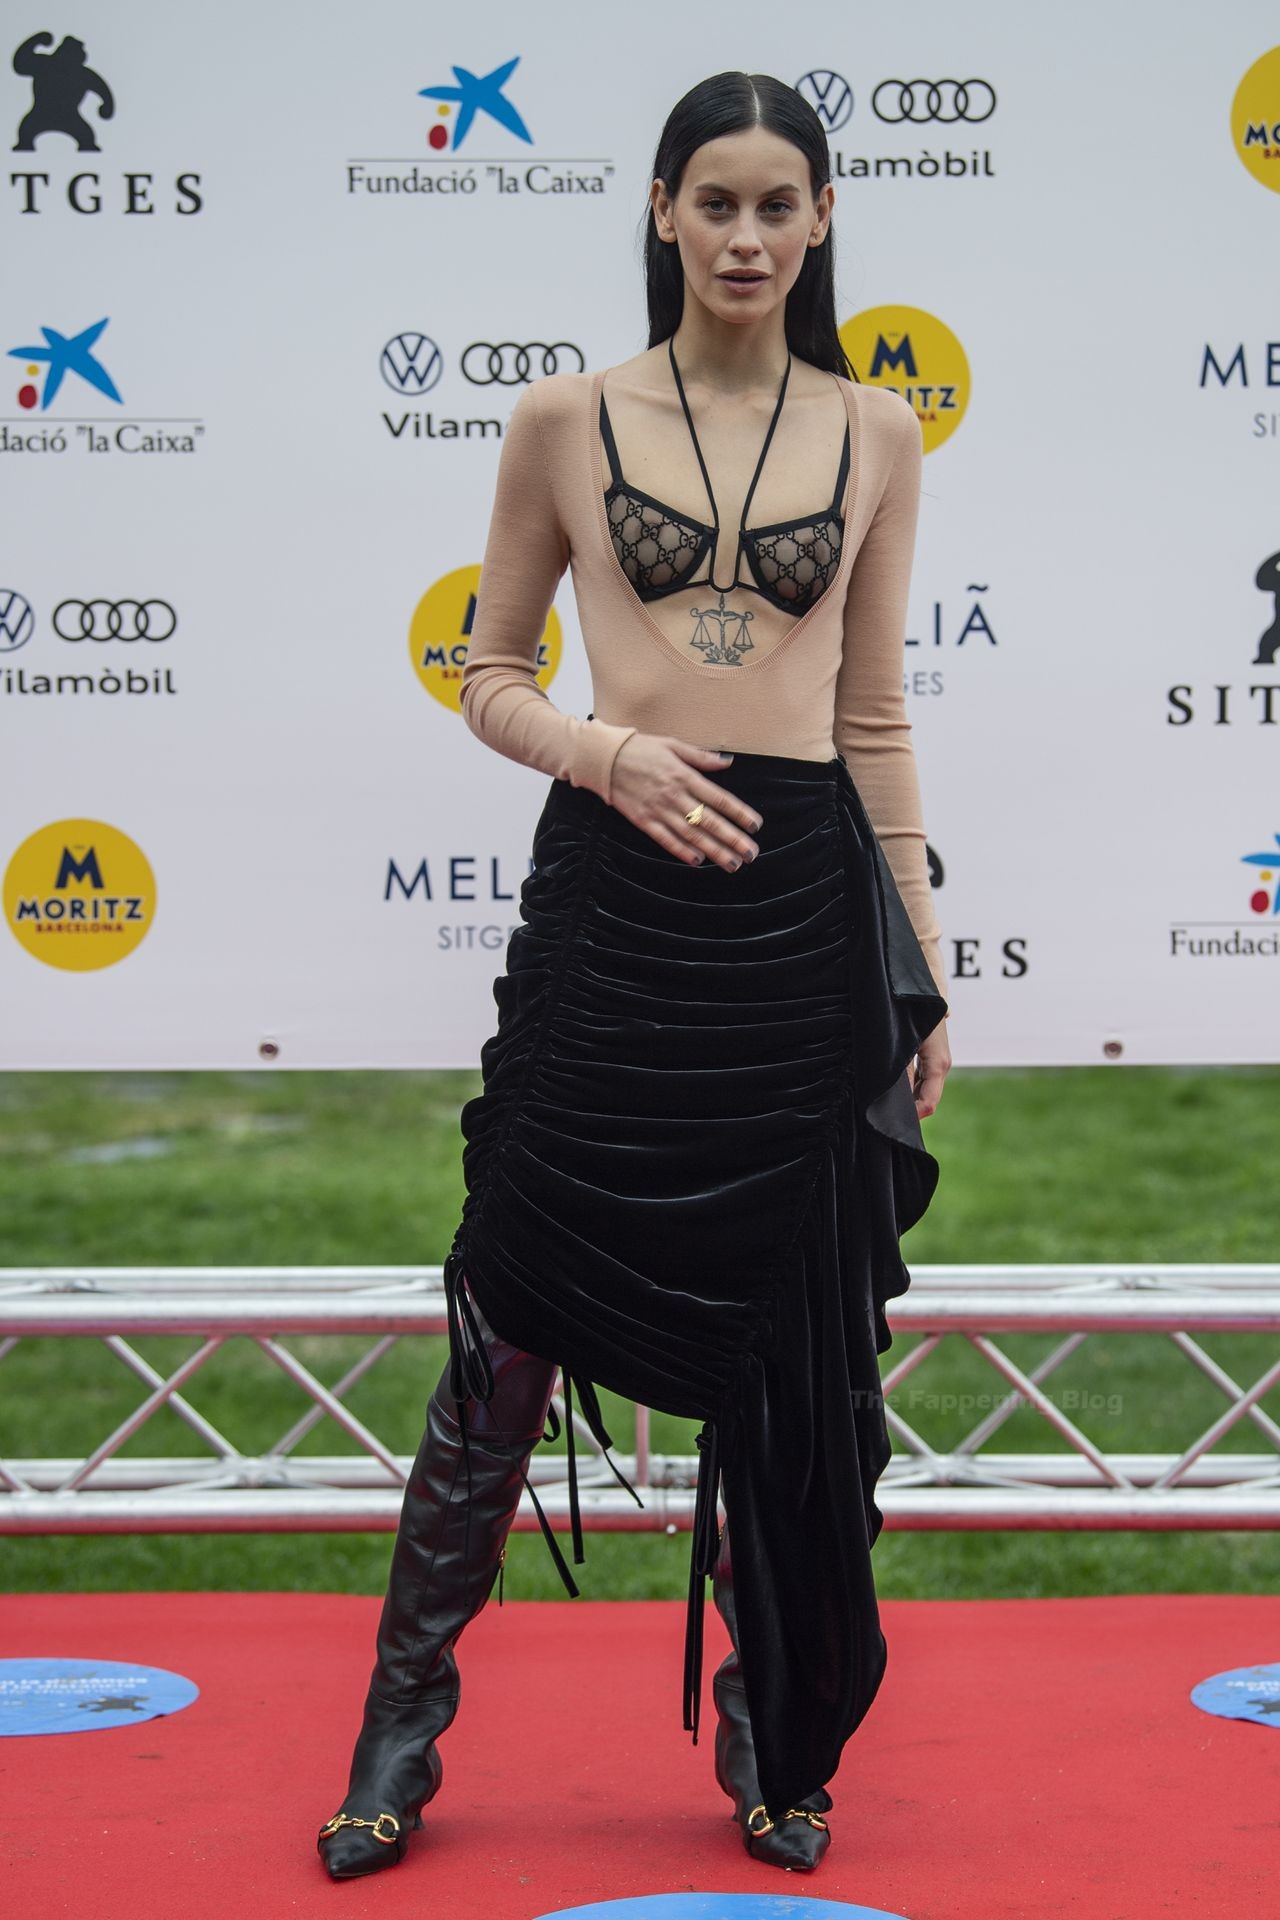 Milena Smith - On red carpet at Sitges film festival in Sitges - Spain